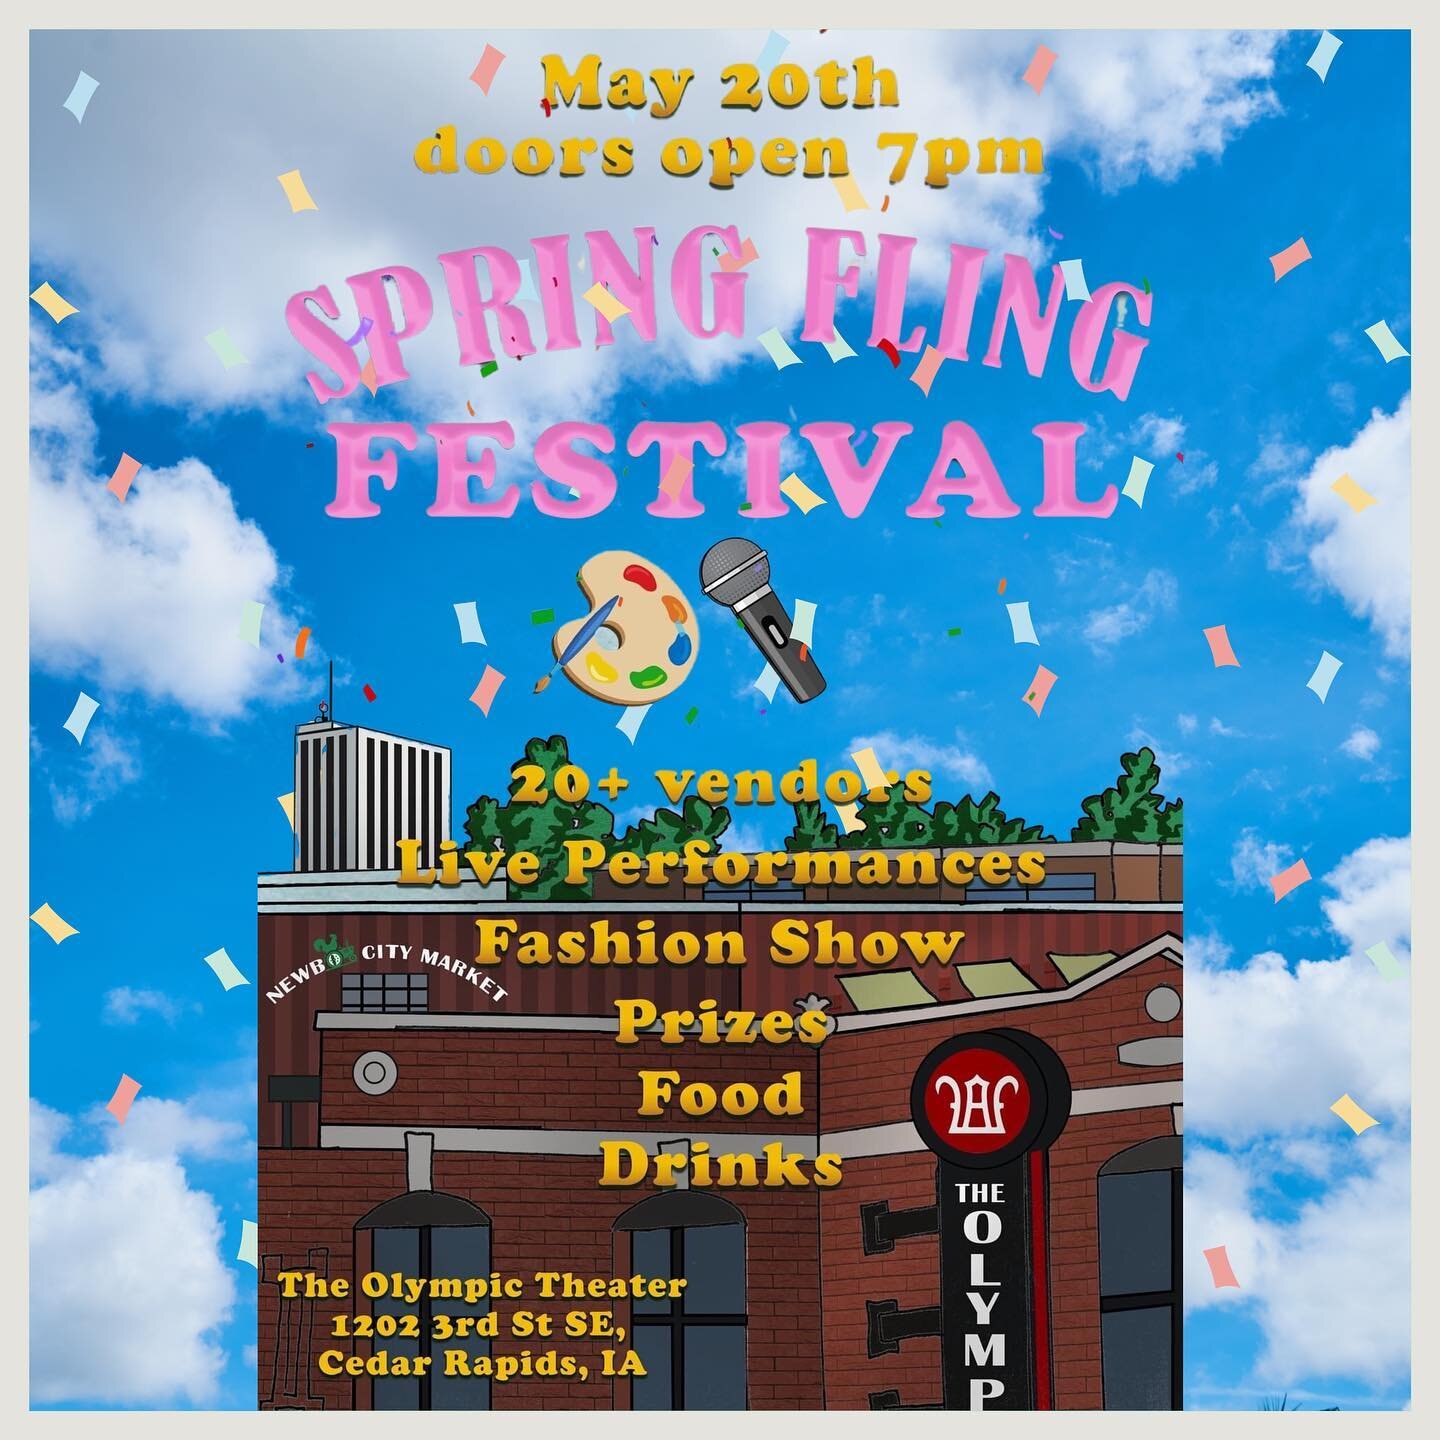 !!!! CEDAR RAPIDS !!!!

The Young Creatives are hosting a Spring Fling Festival at The Olympic Theater on Saturday May 20th! 

&ldquo;Get ready for a festival filled with Music, Art, Food and More!! 

20+ Vendors 
Live Performances 
Food 
Games / Pri